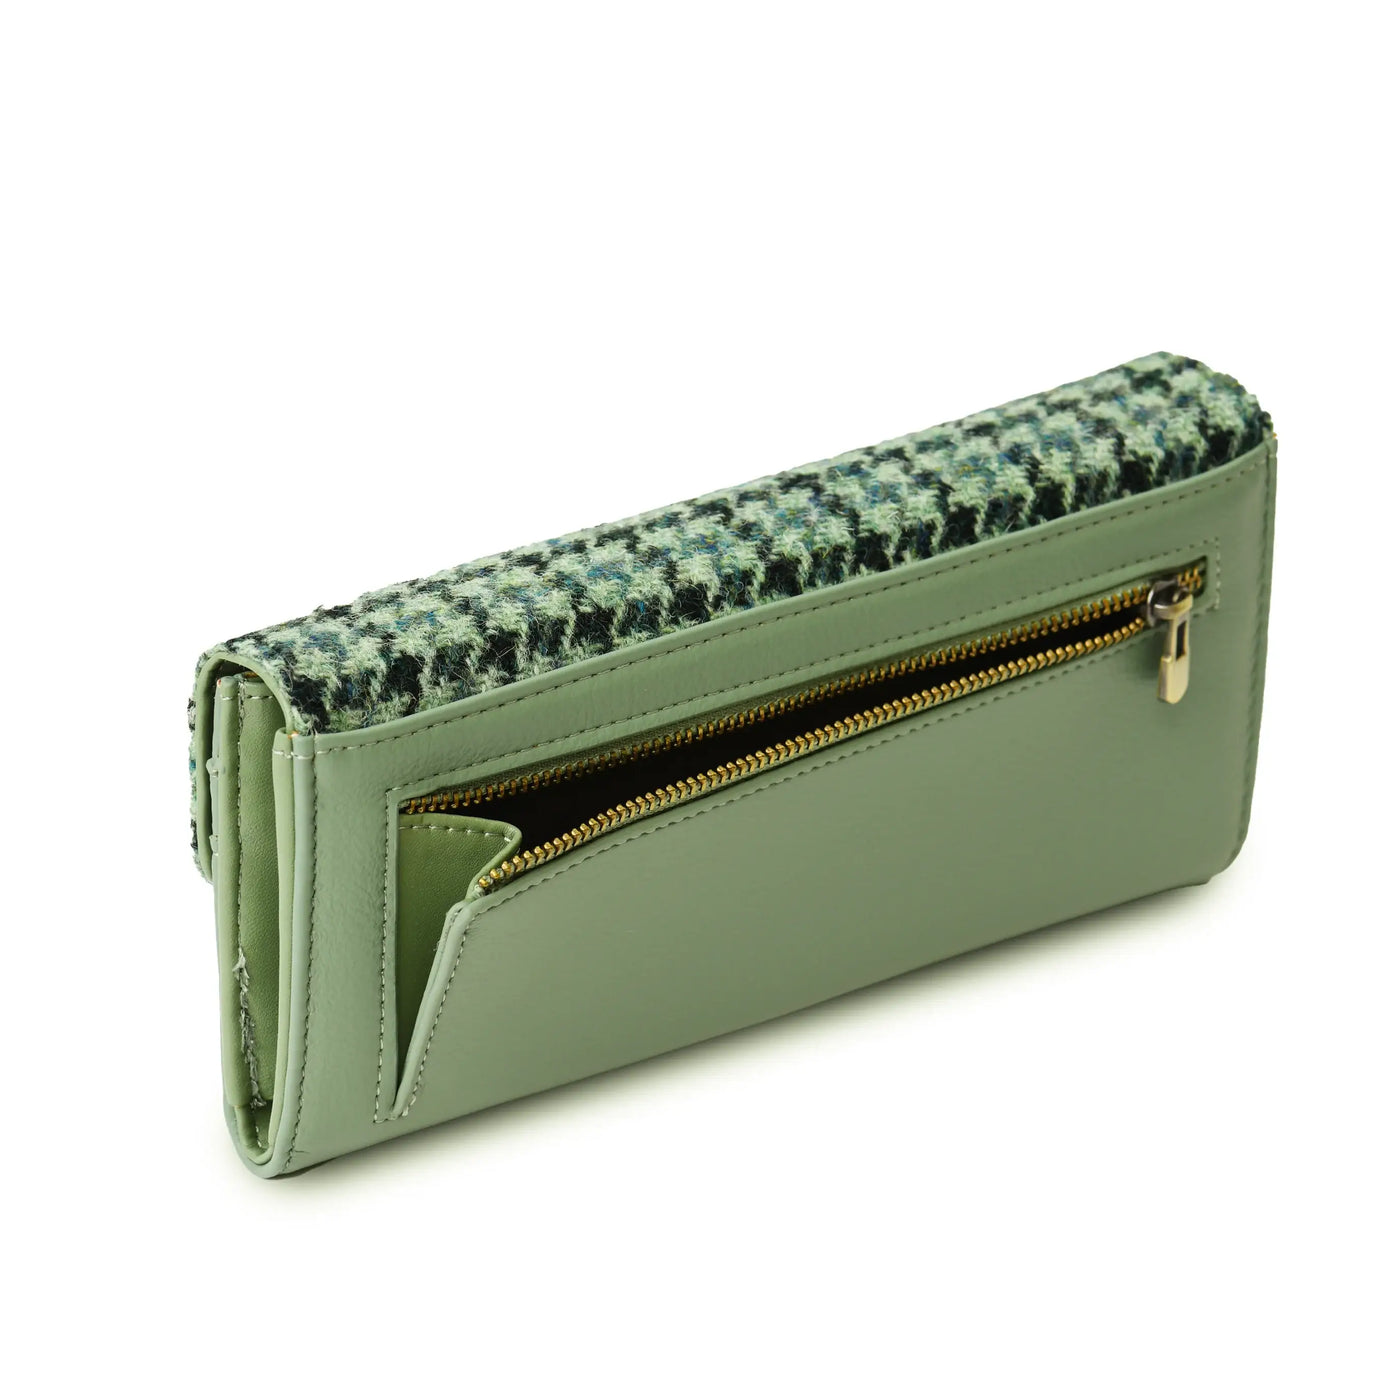 Premium Photo | A green purse with a handle